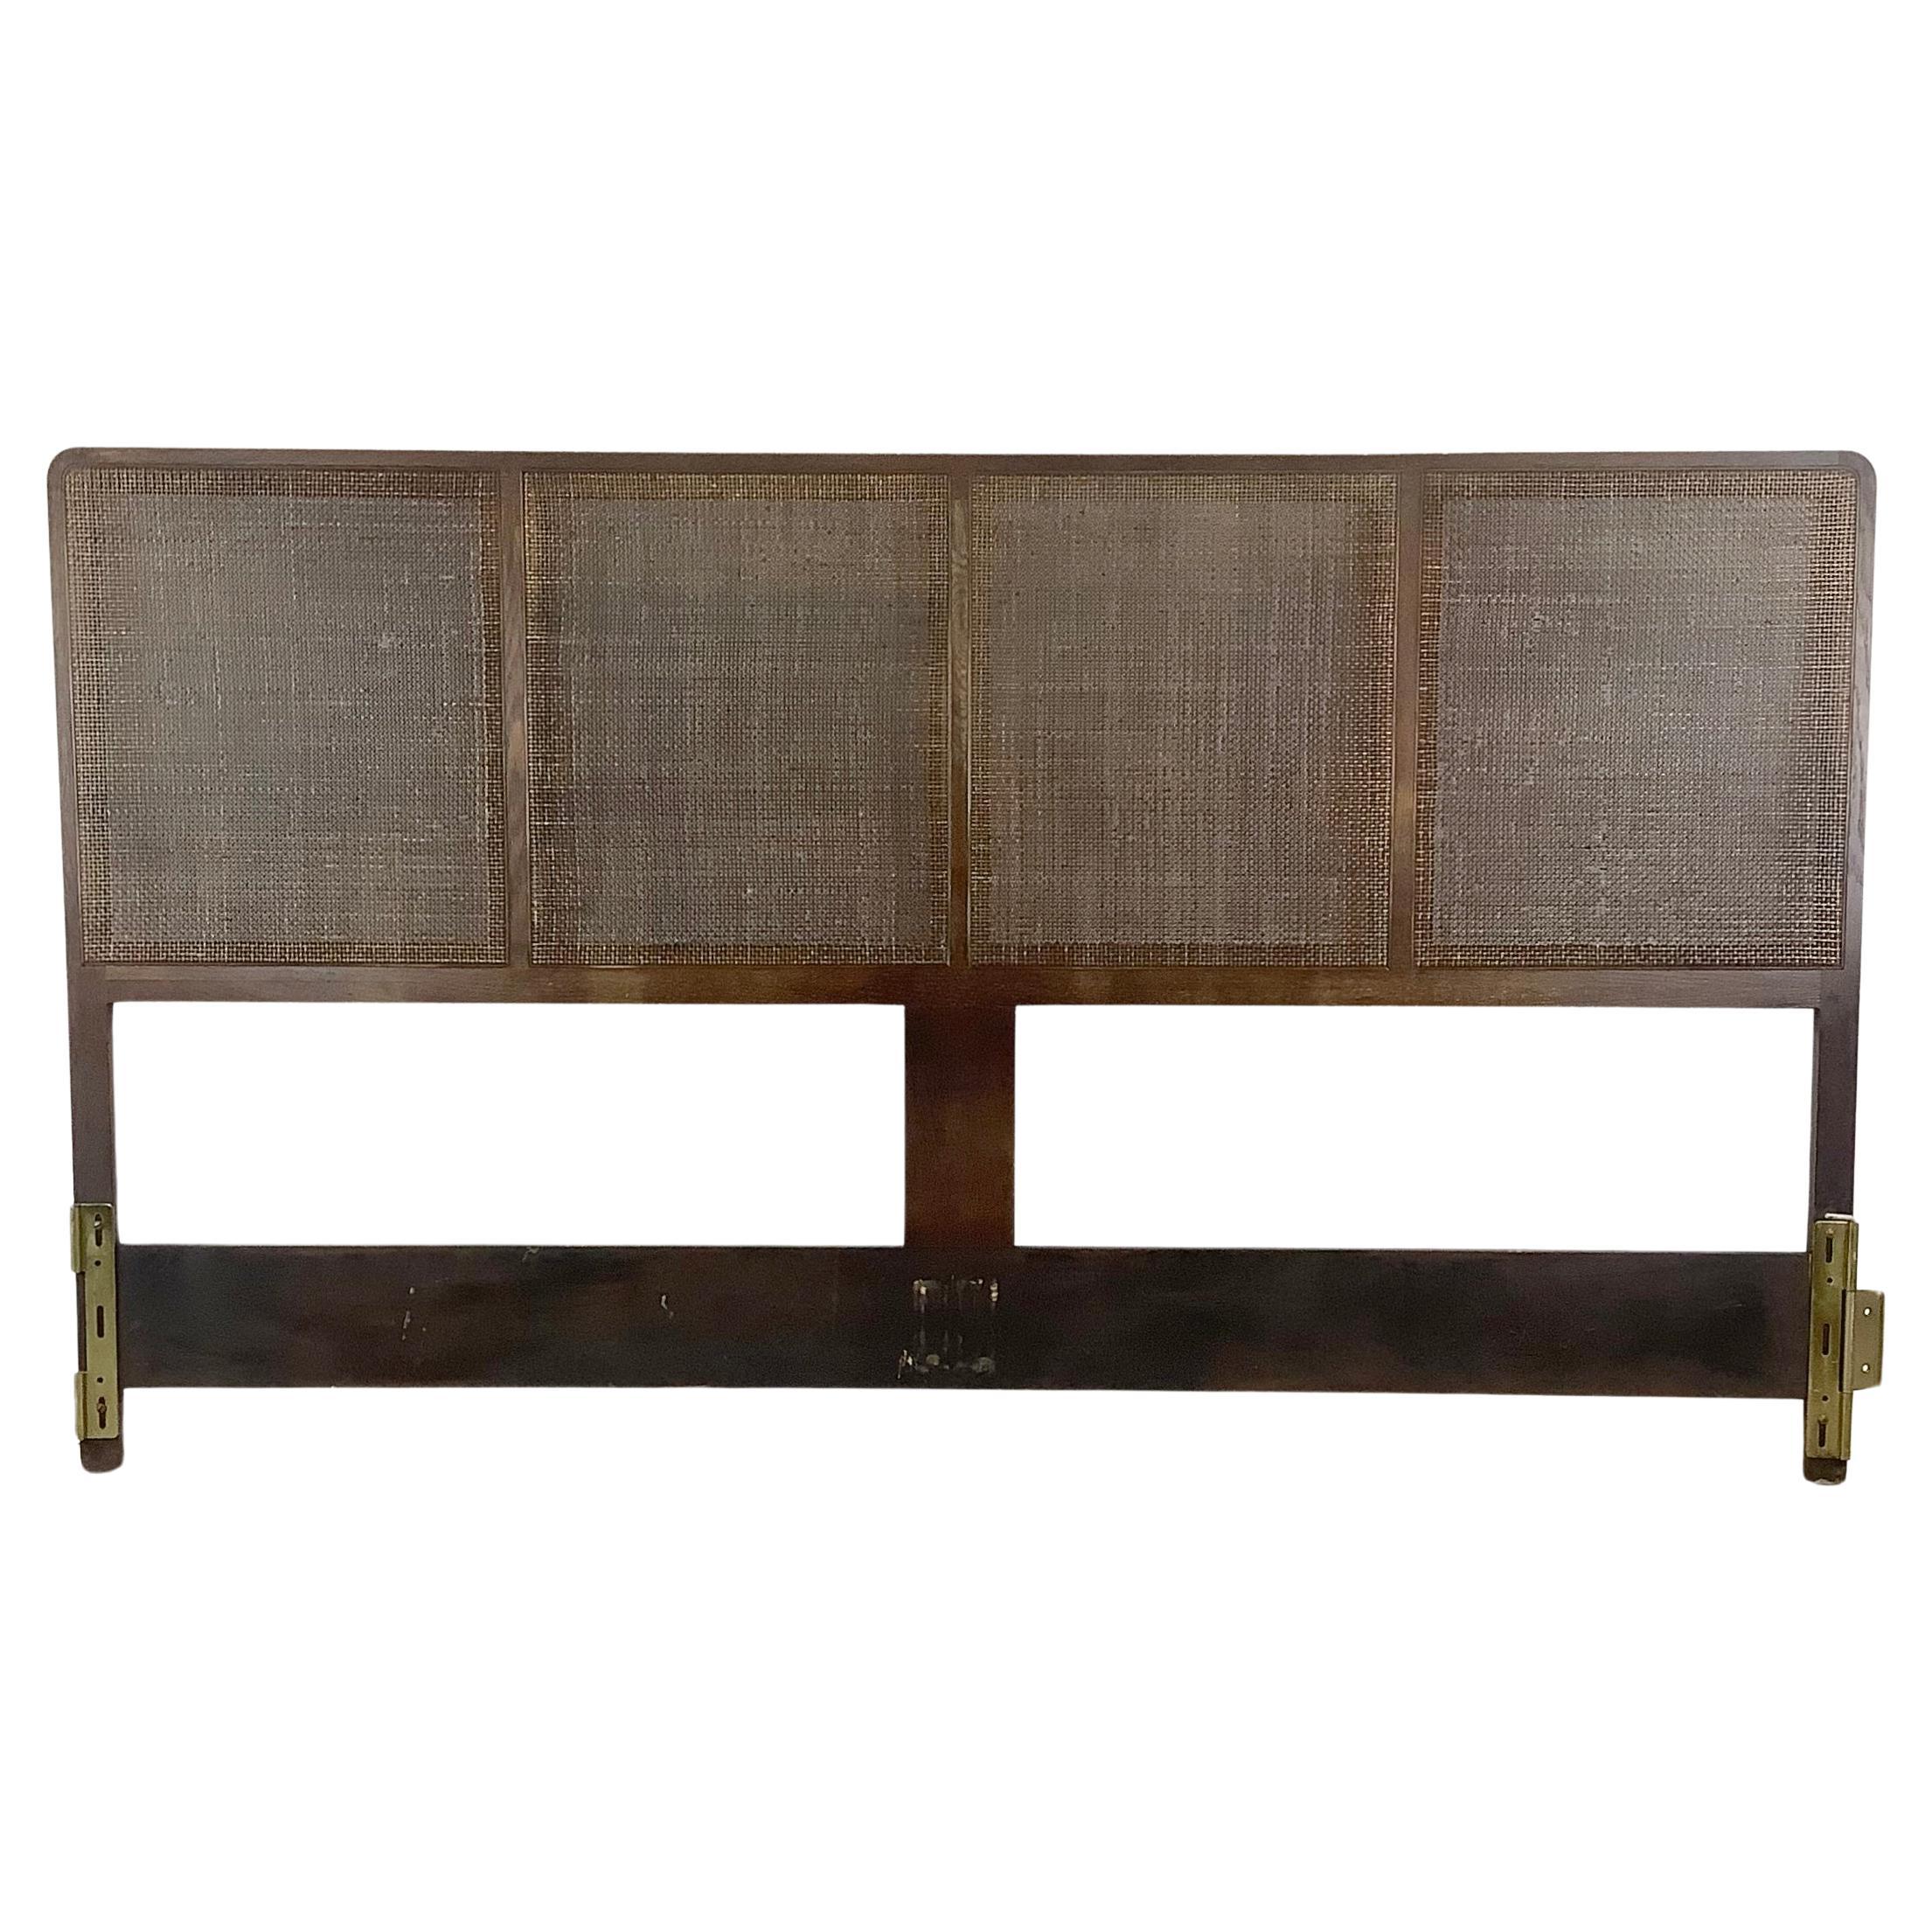 Mid-Century King Size Cane Front Headboard